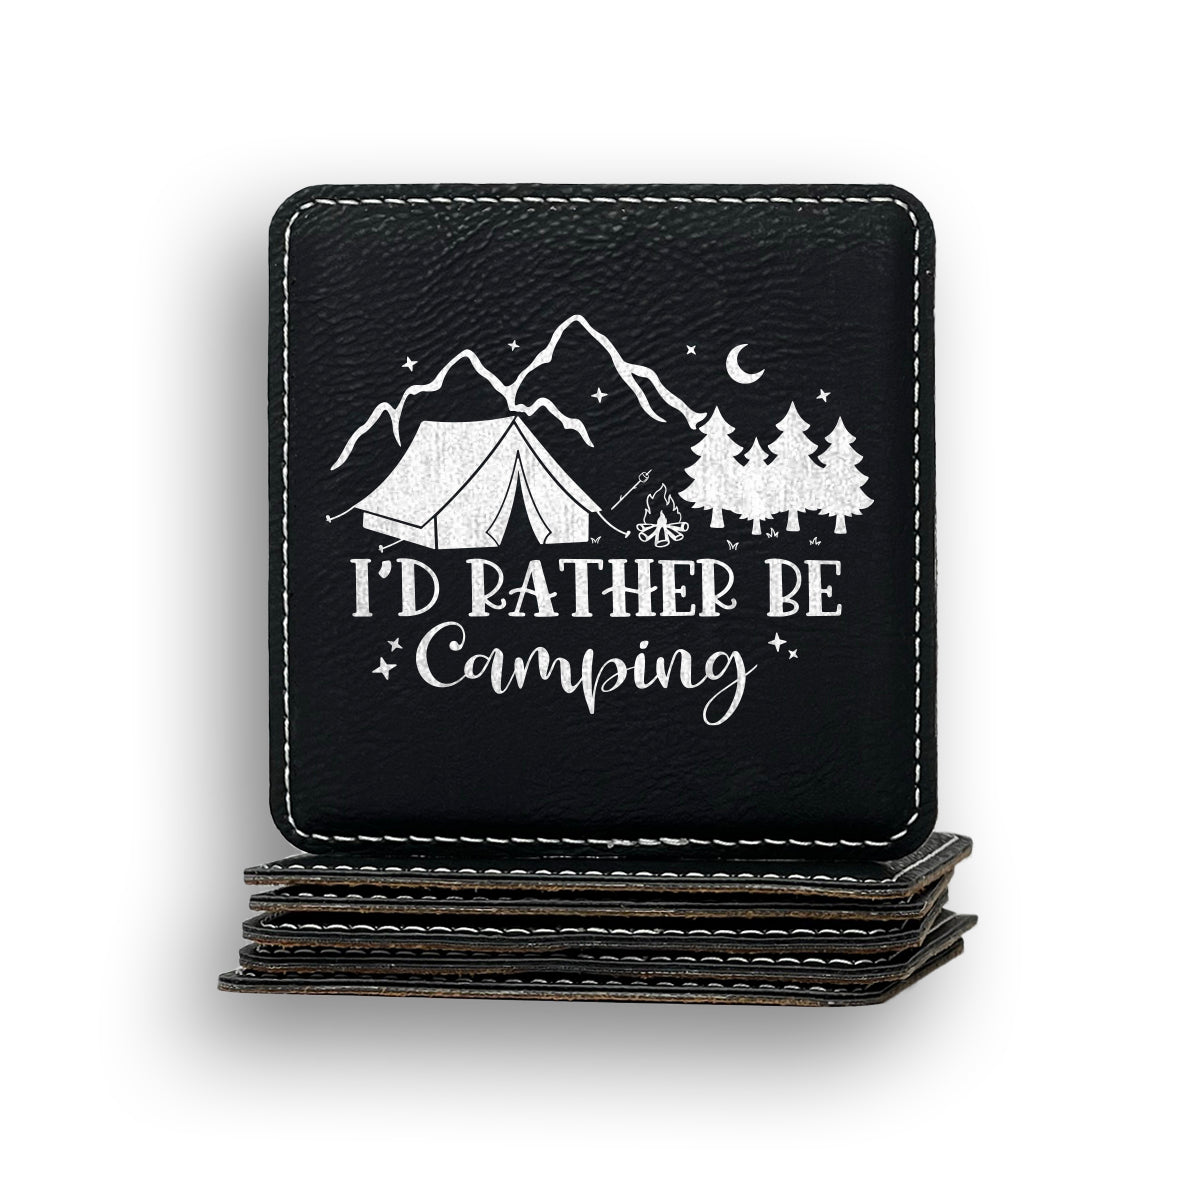 I'd Rather Be Camping Coaster